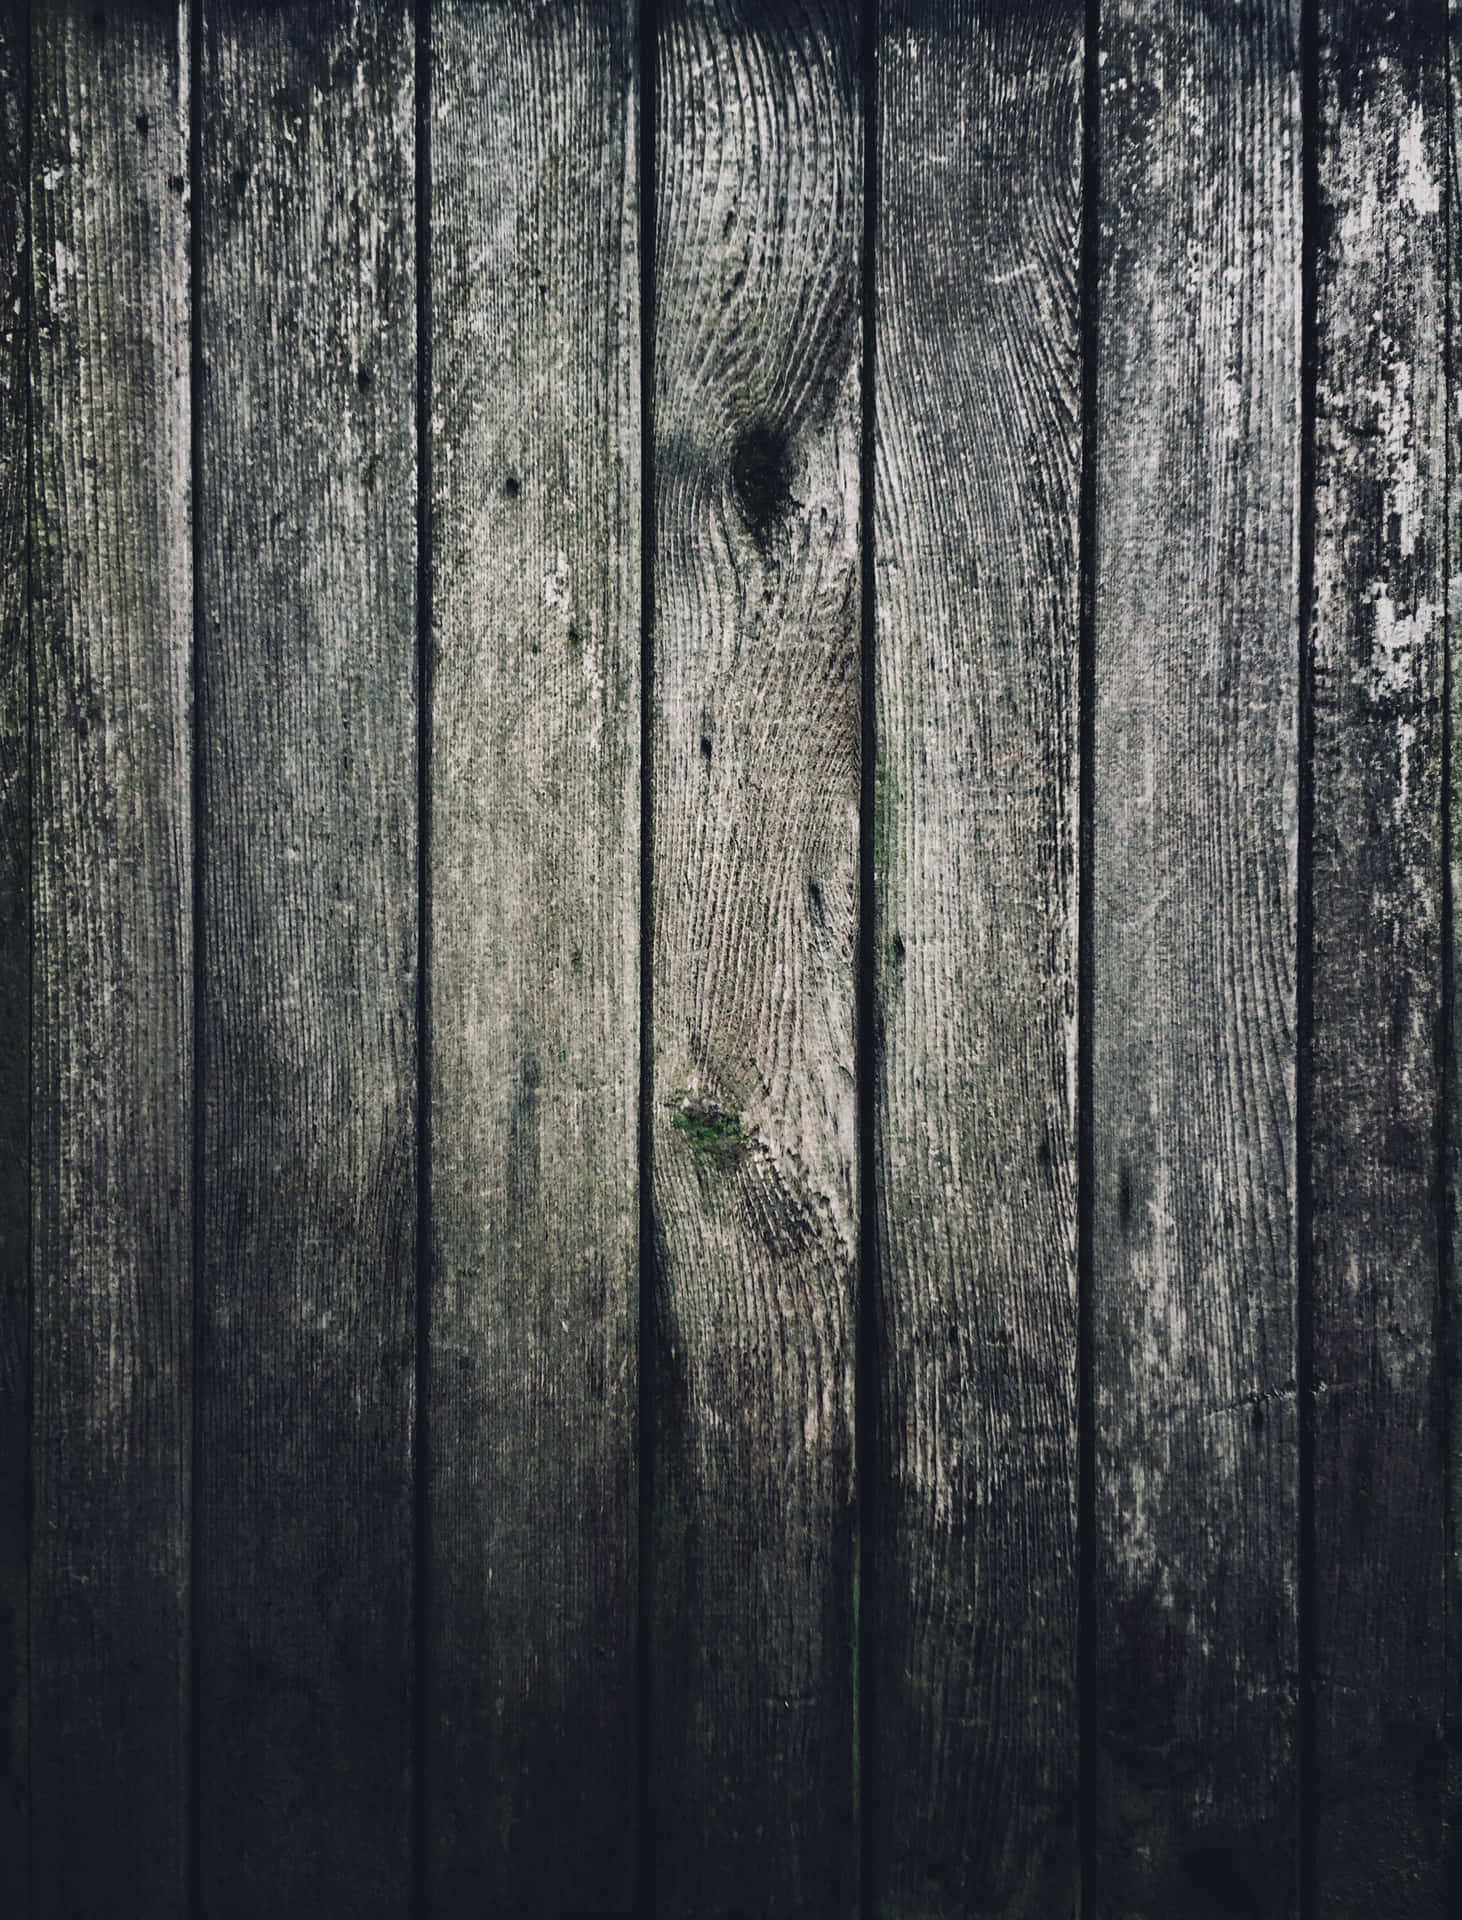 A Close Up Of A Wooden Fence